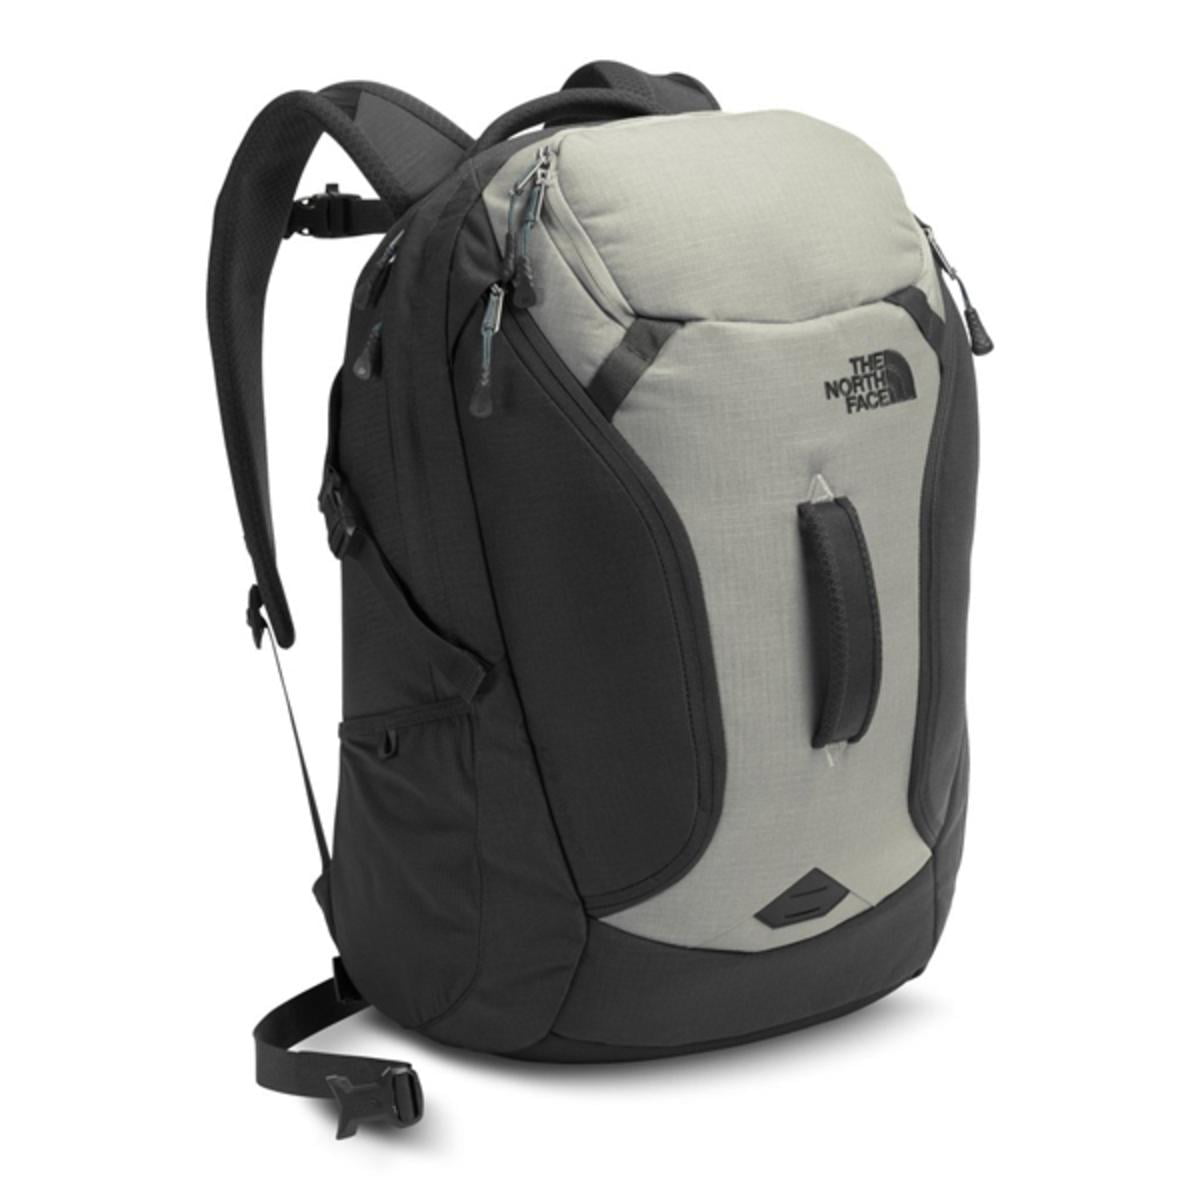 The North Face Big Shot Backpack Bag One Size